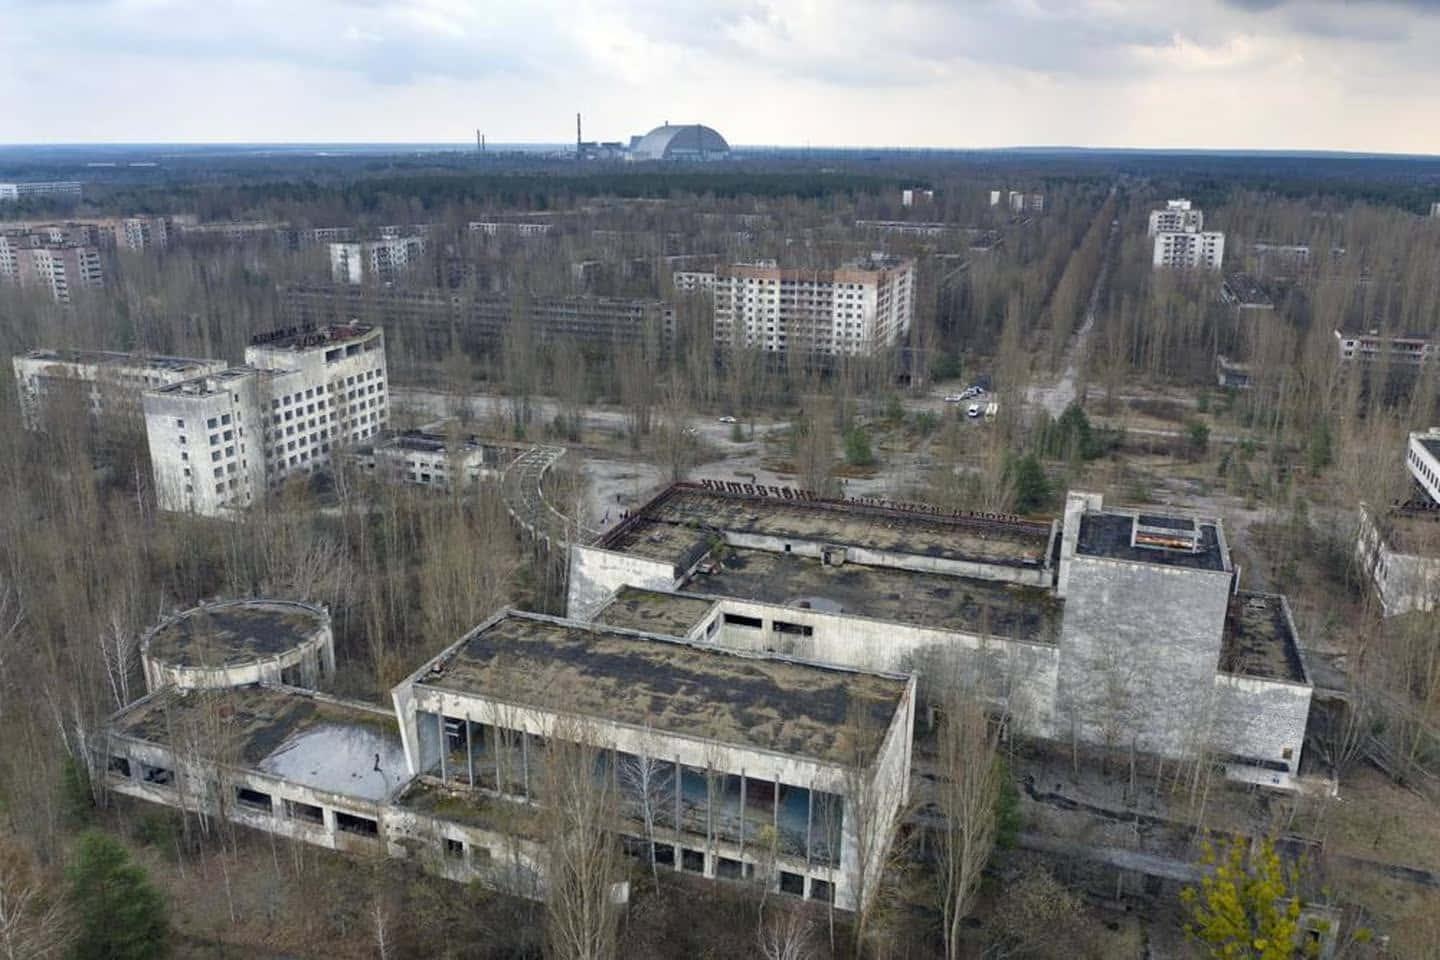 A beautiful sunrise over the abandoned Chernobyl nuclear power plant.